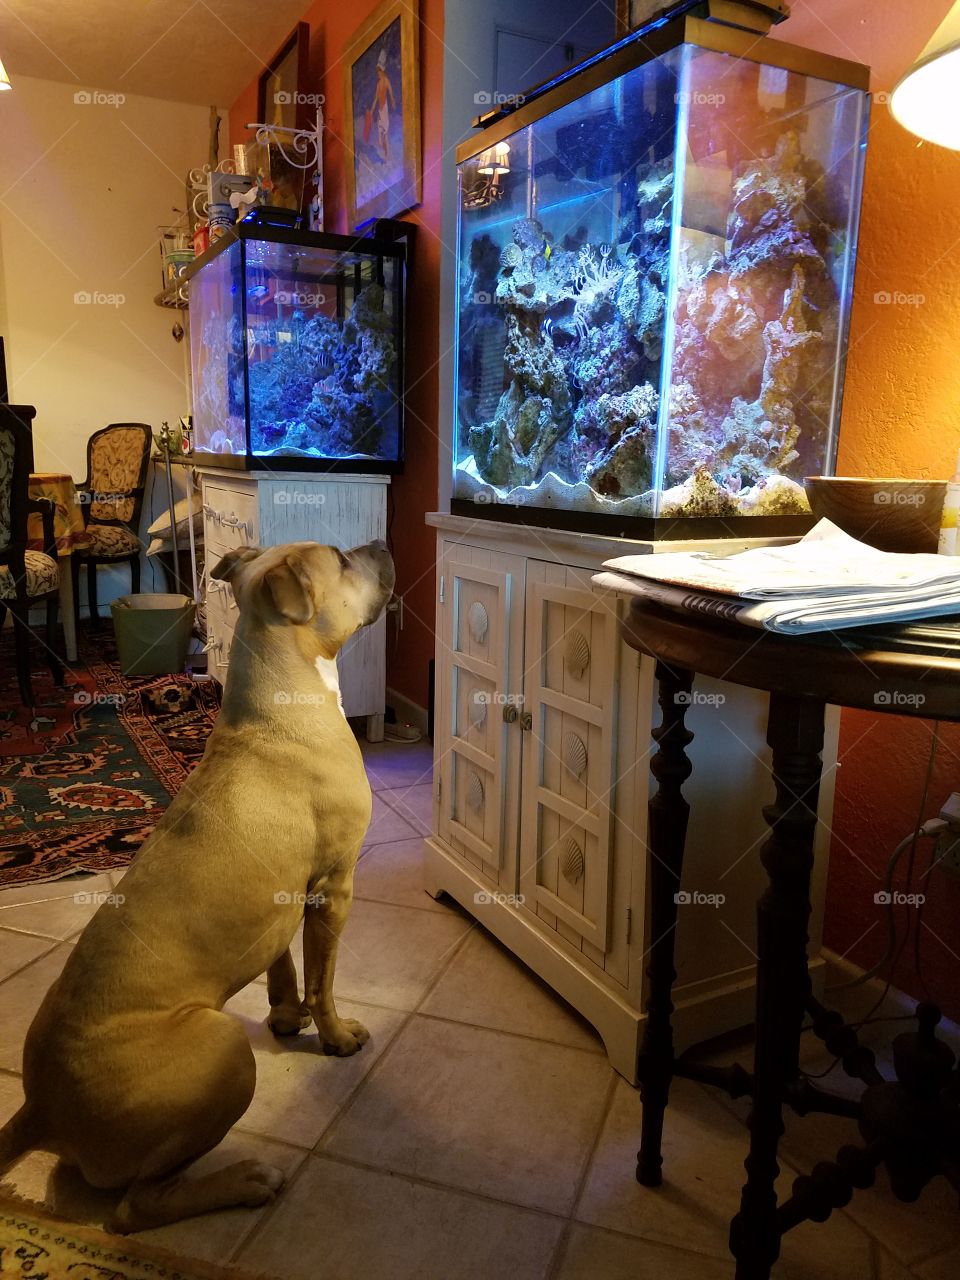 Fawn pitbull dog sitting and watching fish swim in an indoor fish tank in a living room